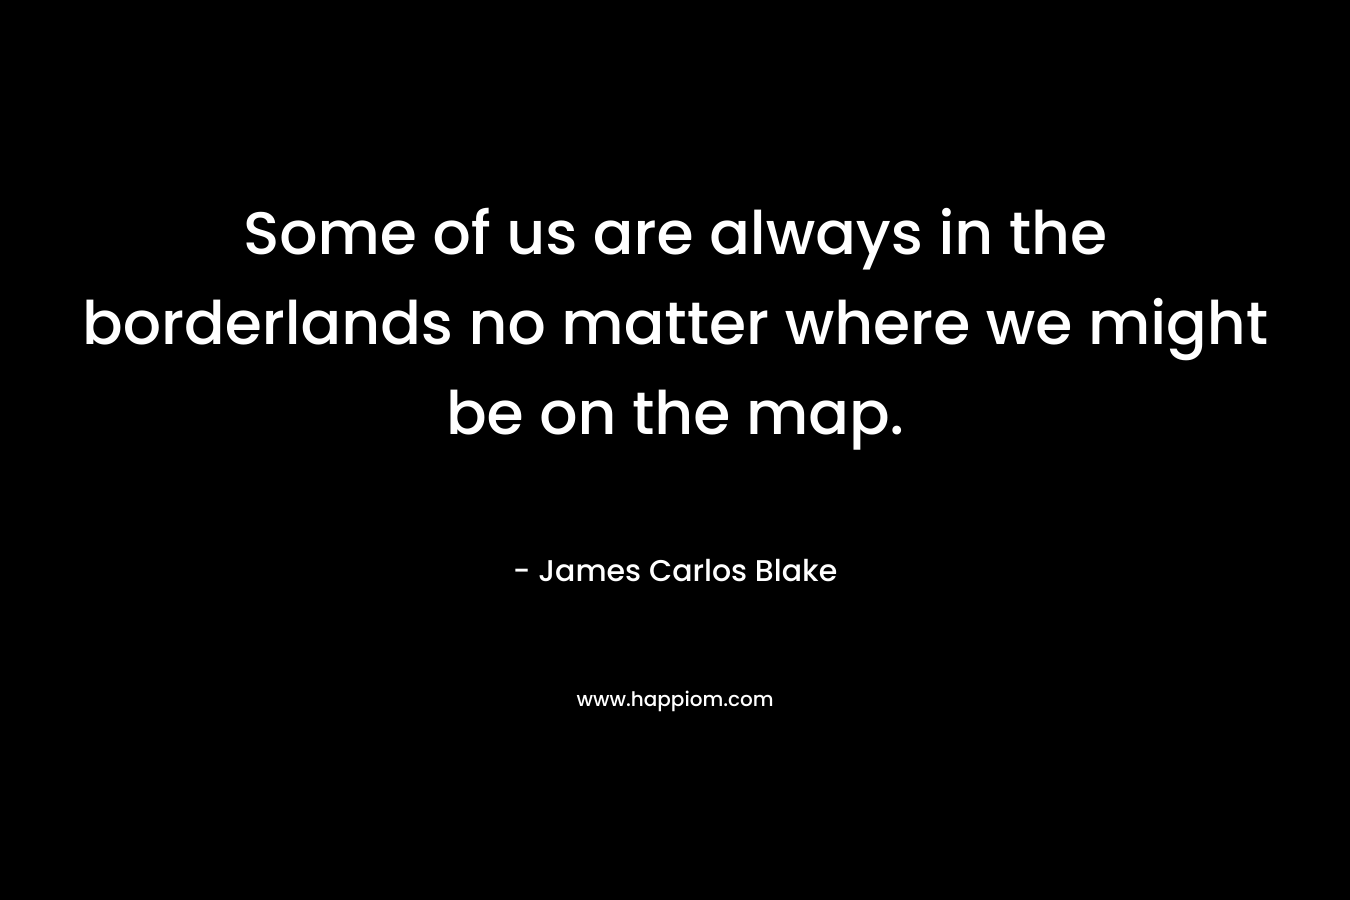 Some of us are always in the borderlands no matter where we might be on the map.